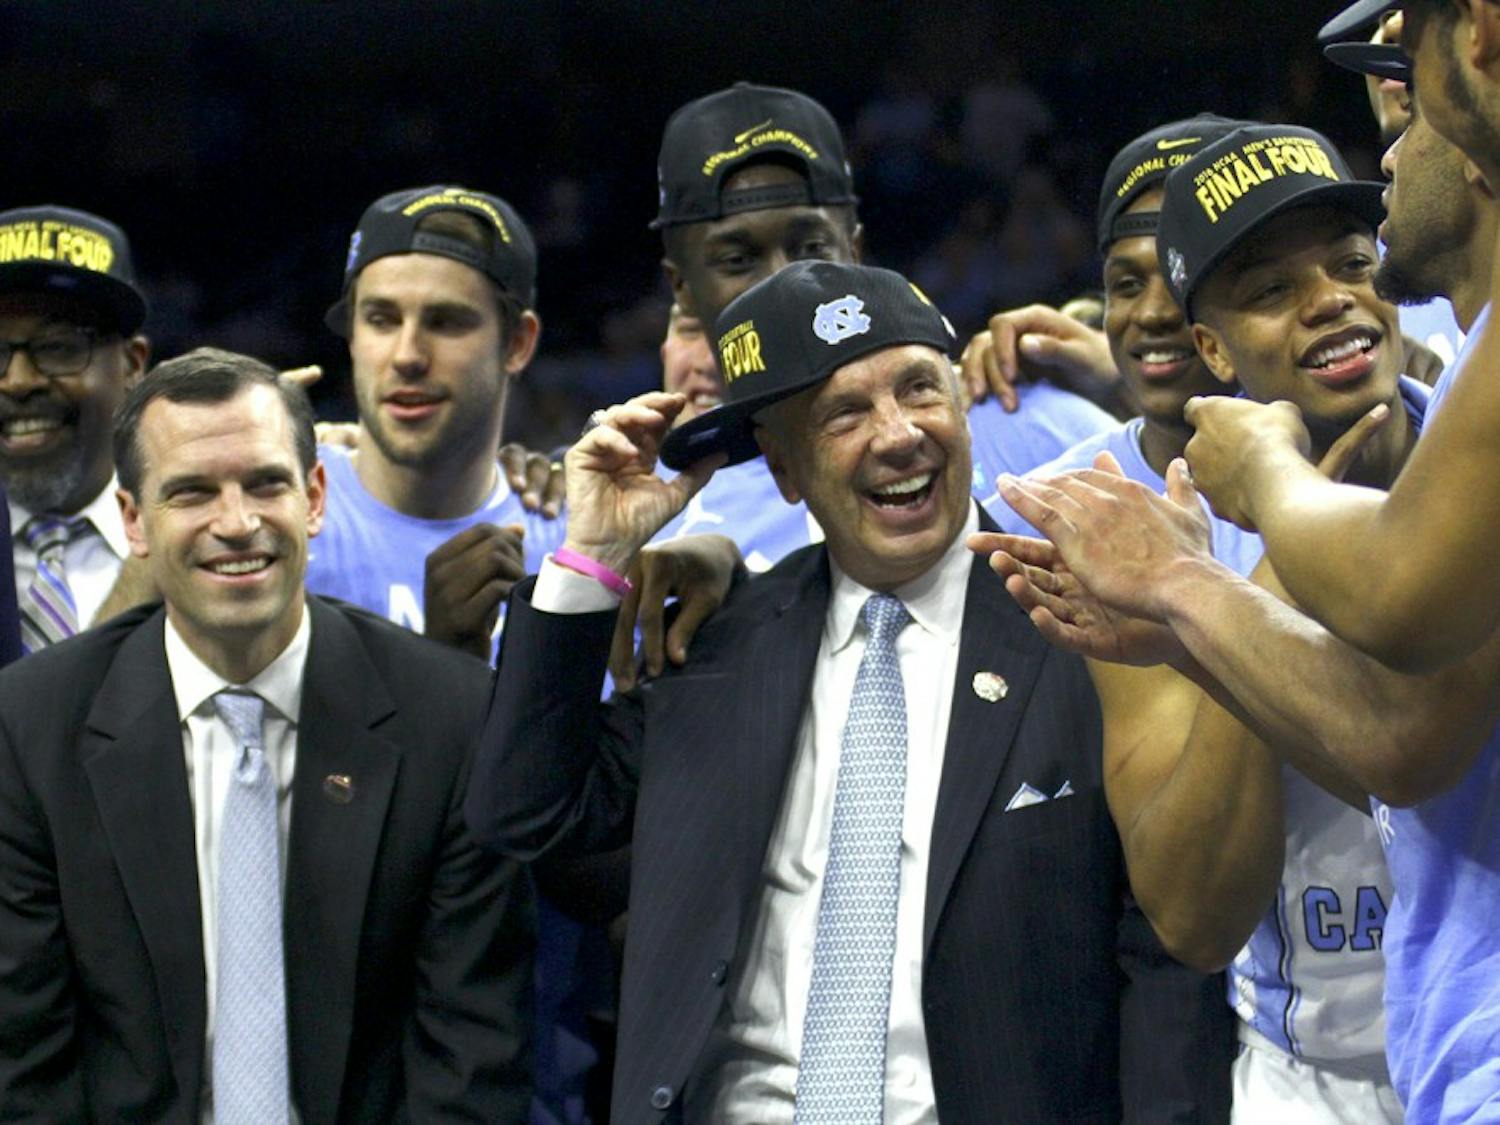 North Carolina men's basketball head coach Roy Williams celebrates with his team after winning a spot in the Final Four.&nbsp;